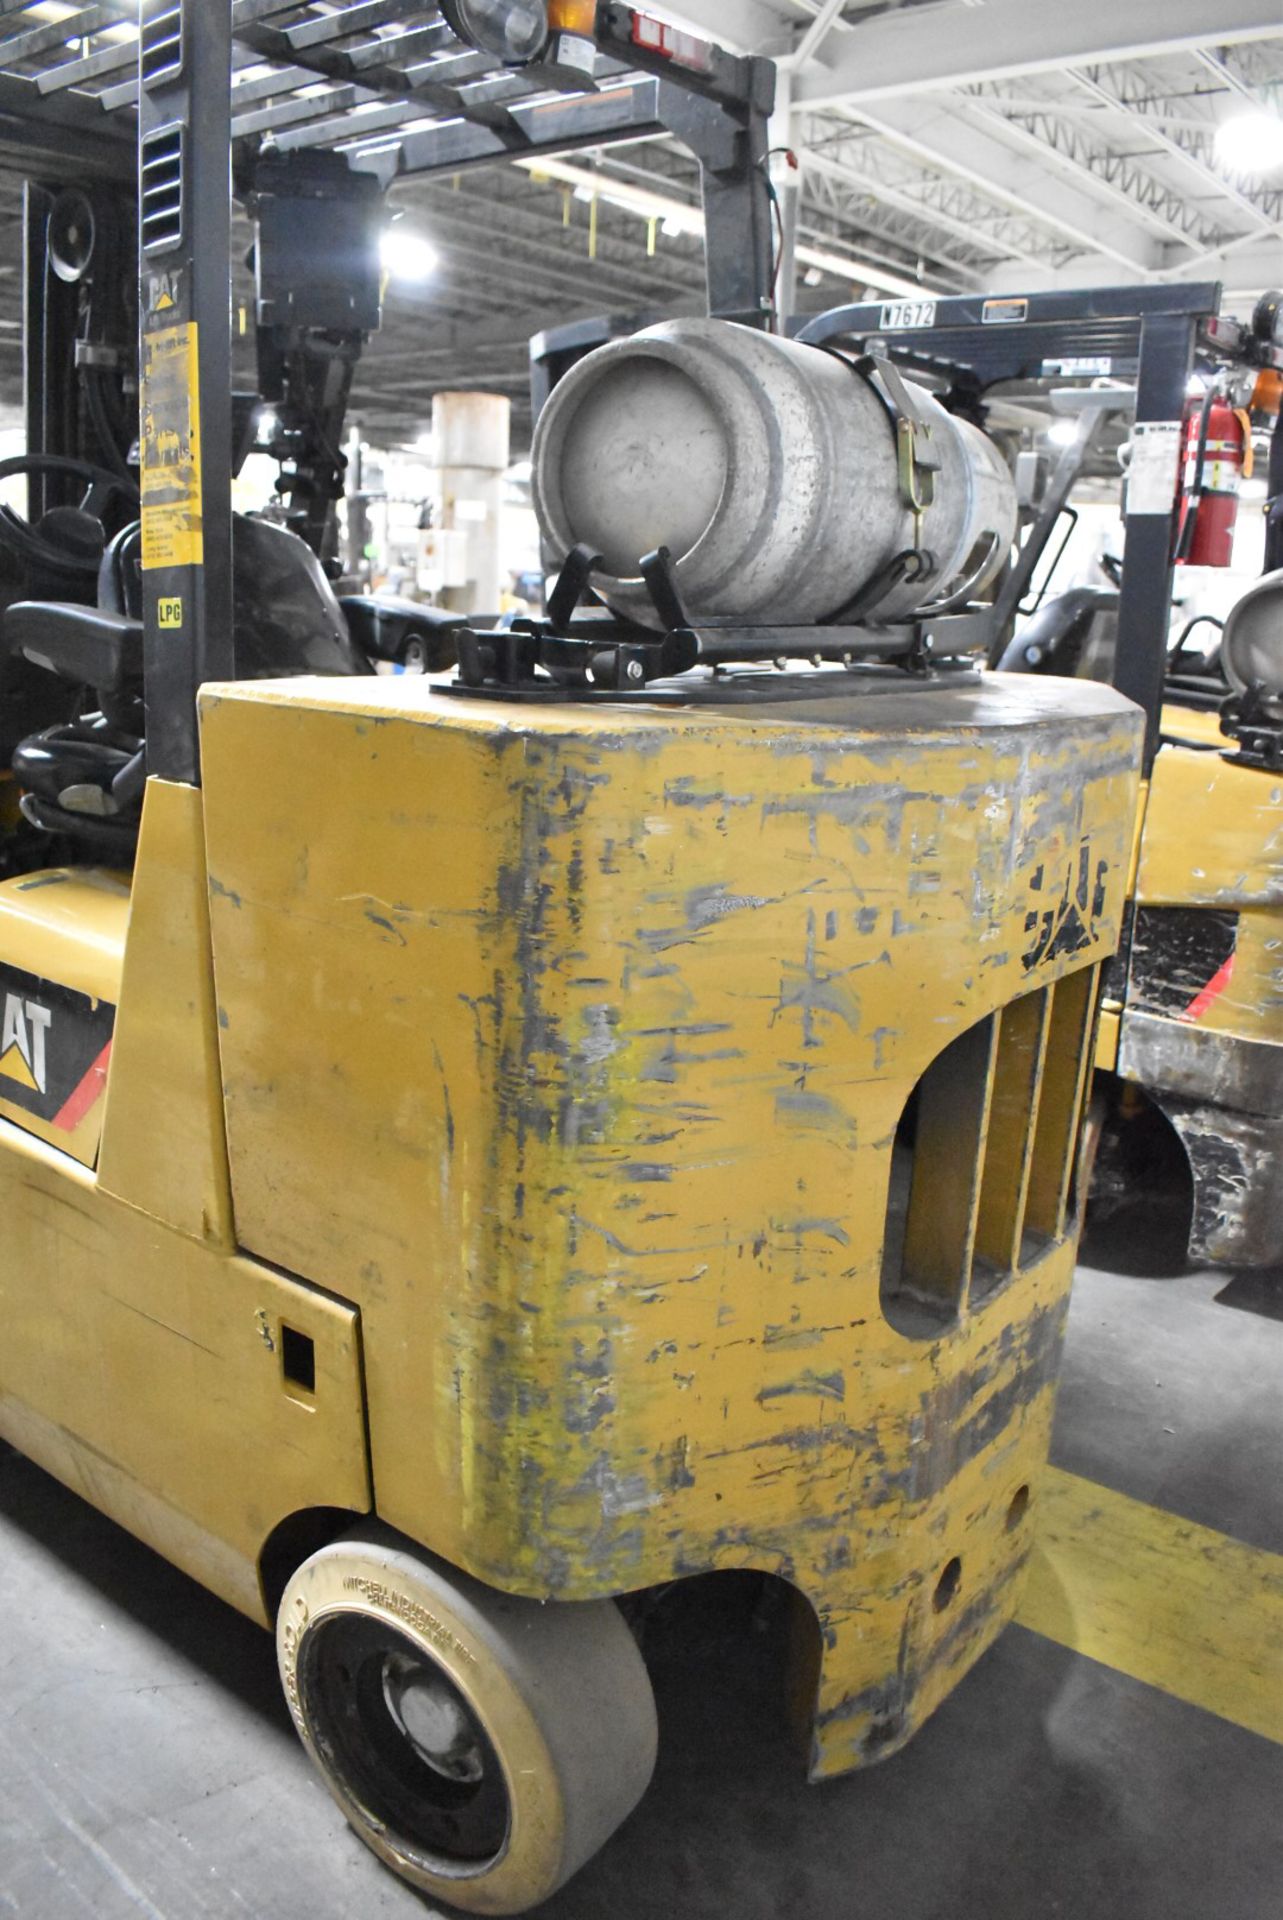 CATERPILLAR (2015) GC55KPRSTR 7,000 LBS. CAPACITY LPG FORKLIFT WITH 172" MAX VERTICAL REACH, 3-STAGE - Image 6 of 12